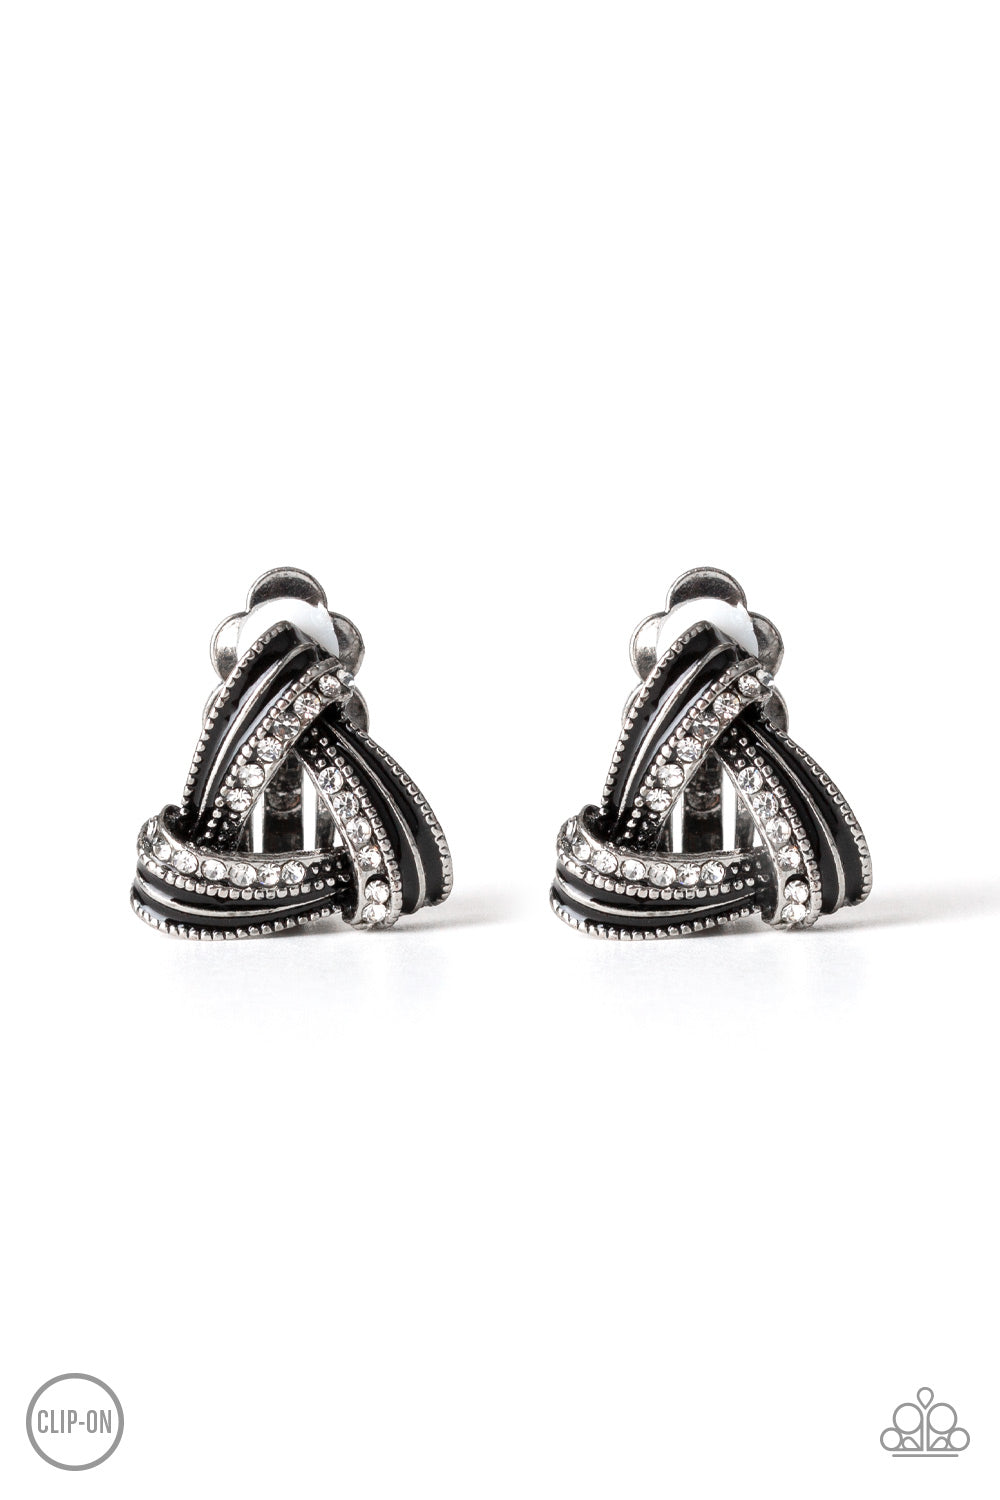 Twirling Twinkle - Black Item #E313 Brushed in a shiny black finish, white rhinestone encrusted frames overlap into a bold triangular frame for a refined flair. Earring attaches to a standard clip-on earrings. All Paparazzi Accessories are lead free and nickel free!  Sold as one pair of clip-on earrings.